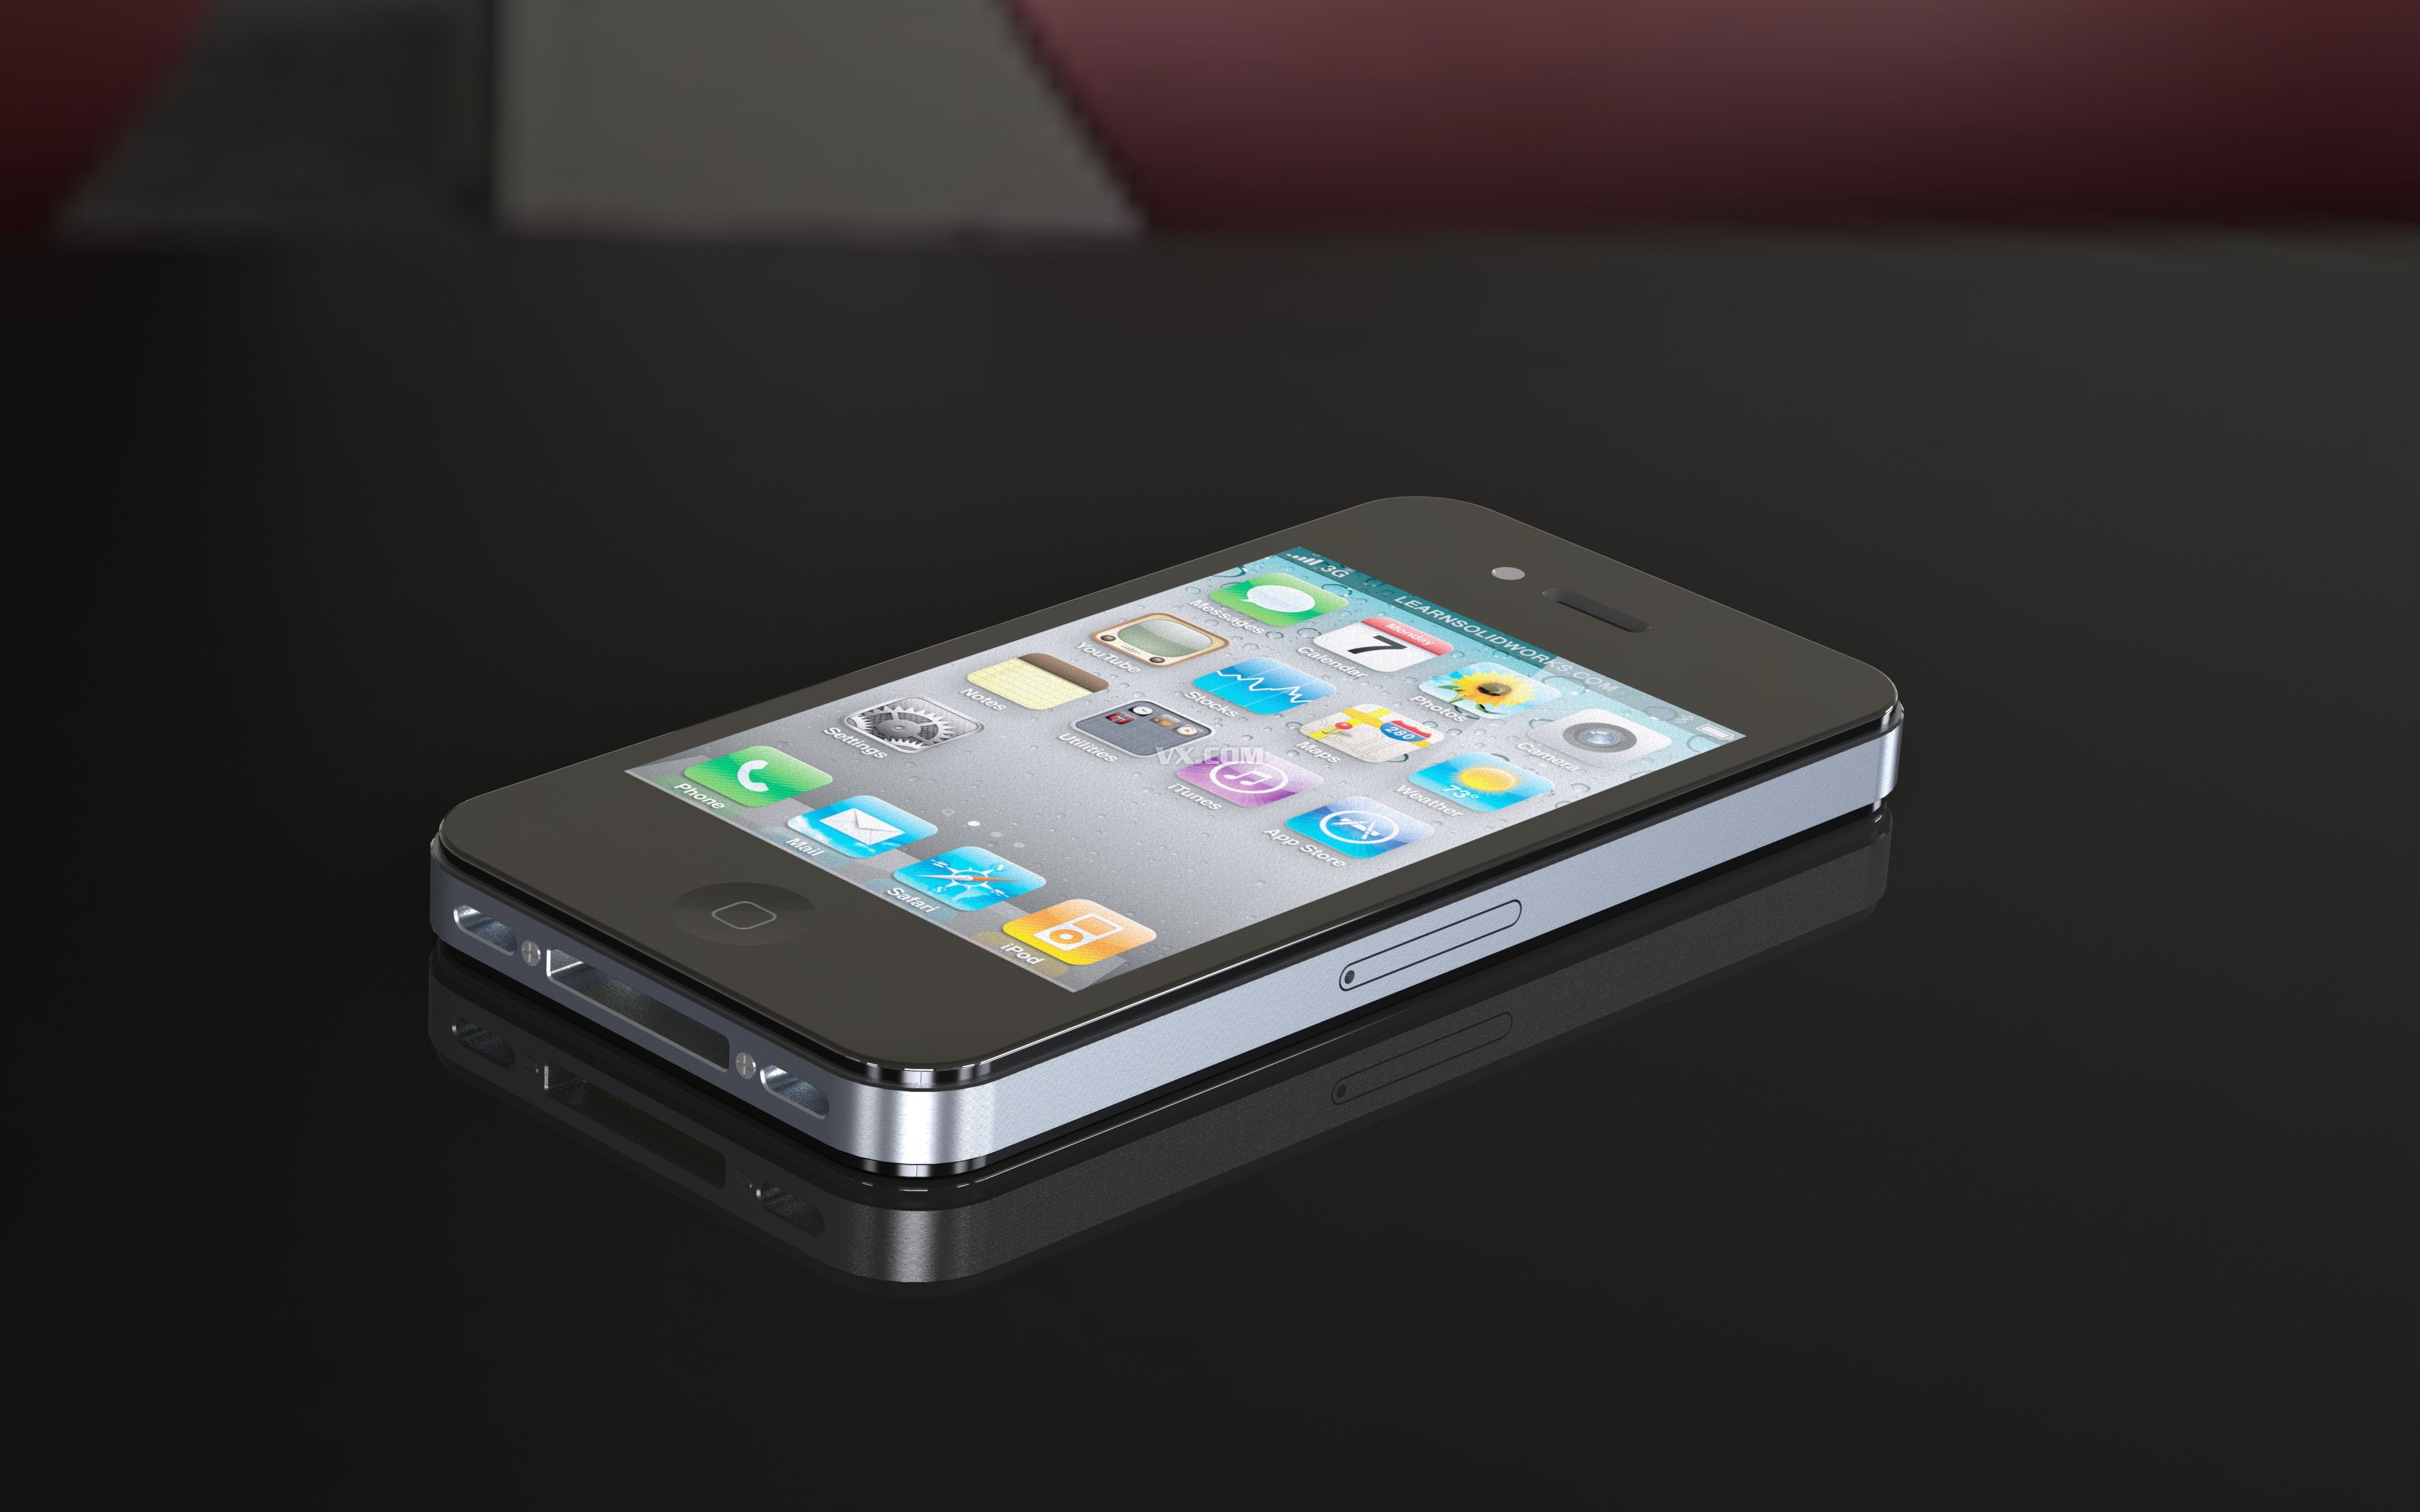 iPhone 5s vs. iPhone 5c vs. iPhone 4s: Which iPhone should you get? | iMore